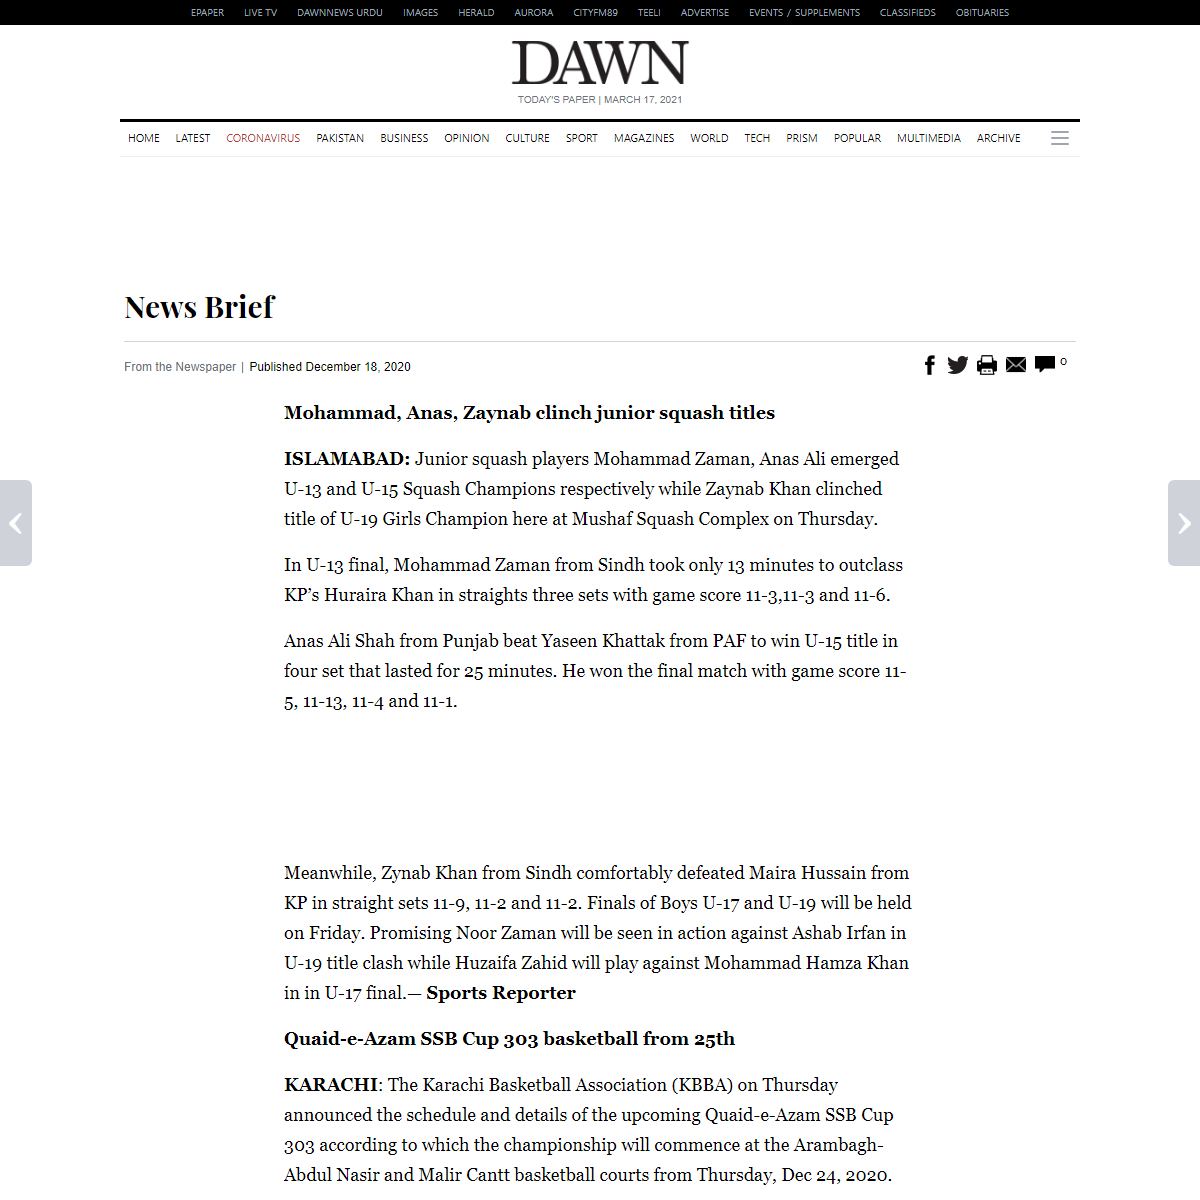 A complete backup of https://www.dawn.com/news/1596350